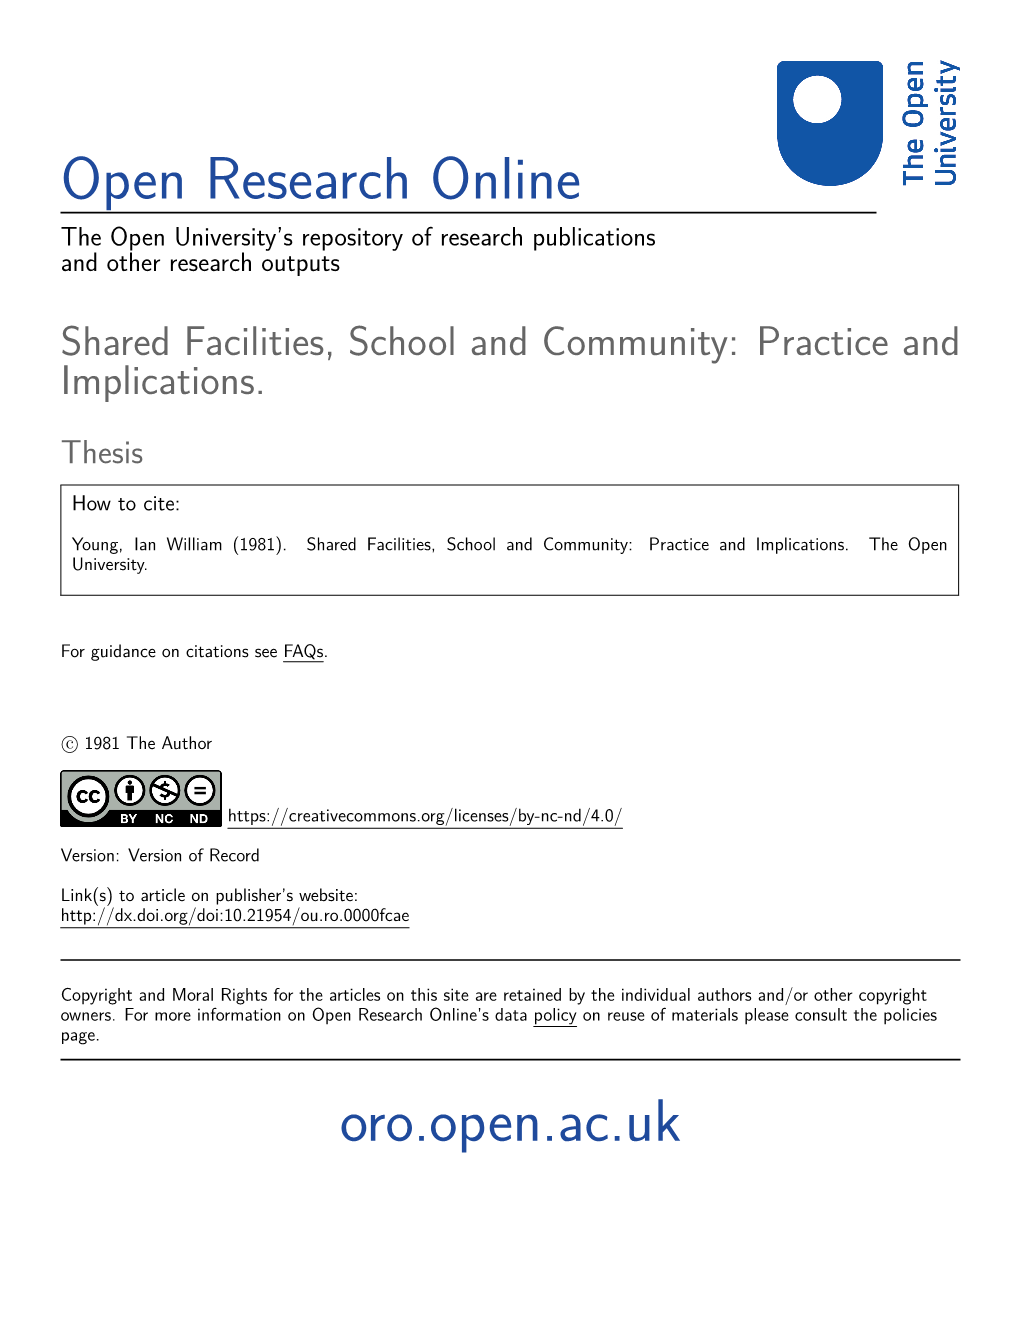 Shared Facilities, School and Community: Practice and Implications